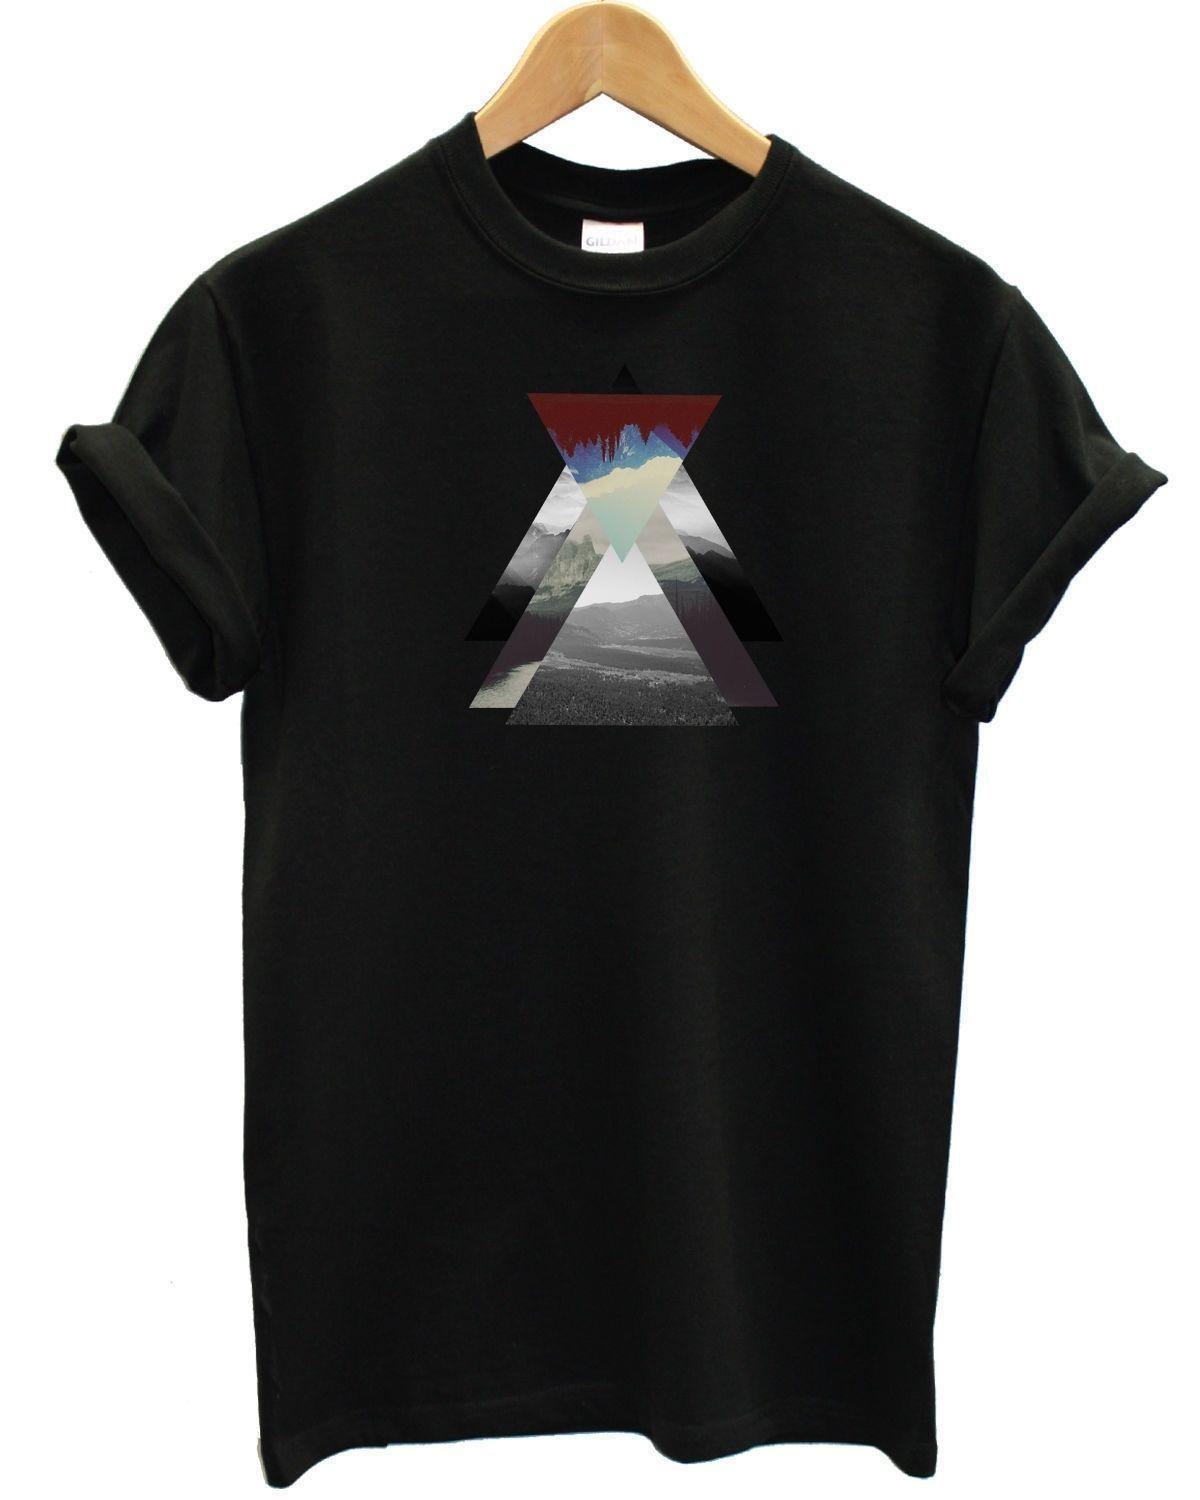 Hipster Mountain Triangle Logo - Mountain Triangle Printed T Shirt Fashion Hipster Indie Tumblr Swag ...